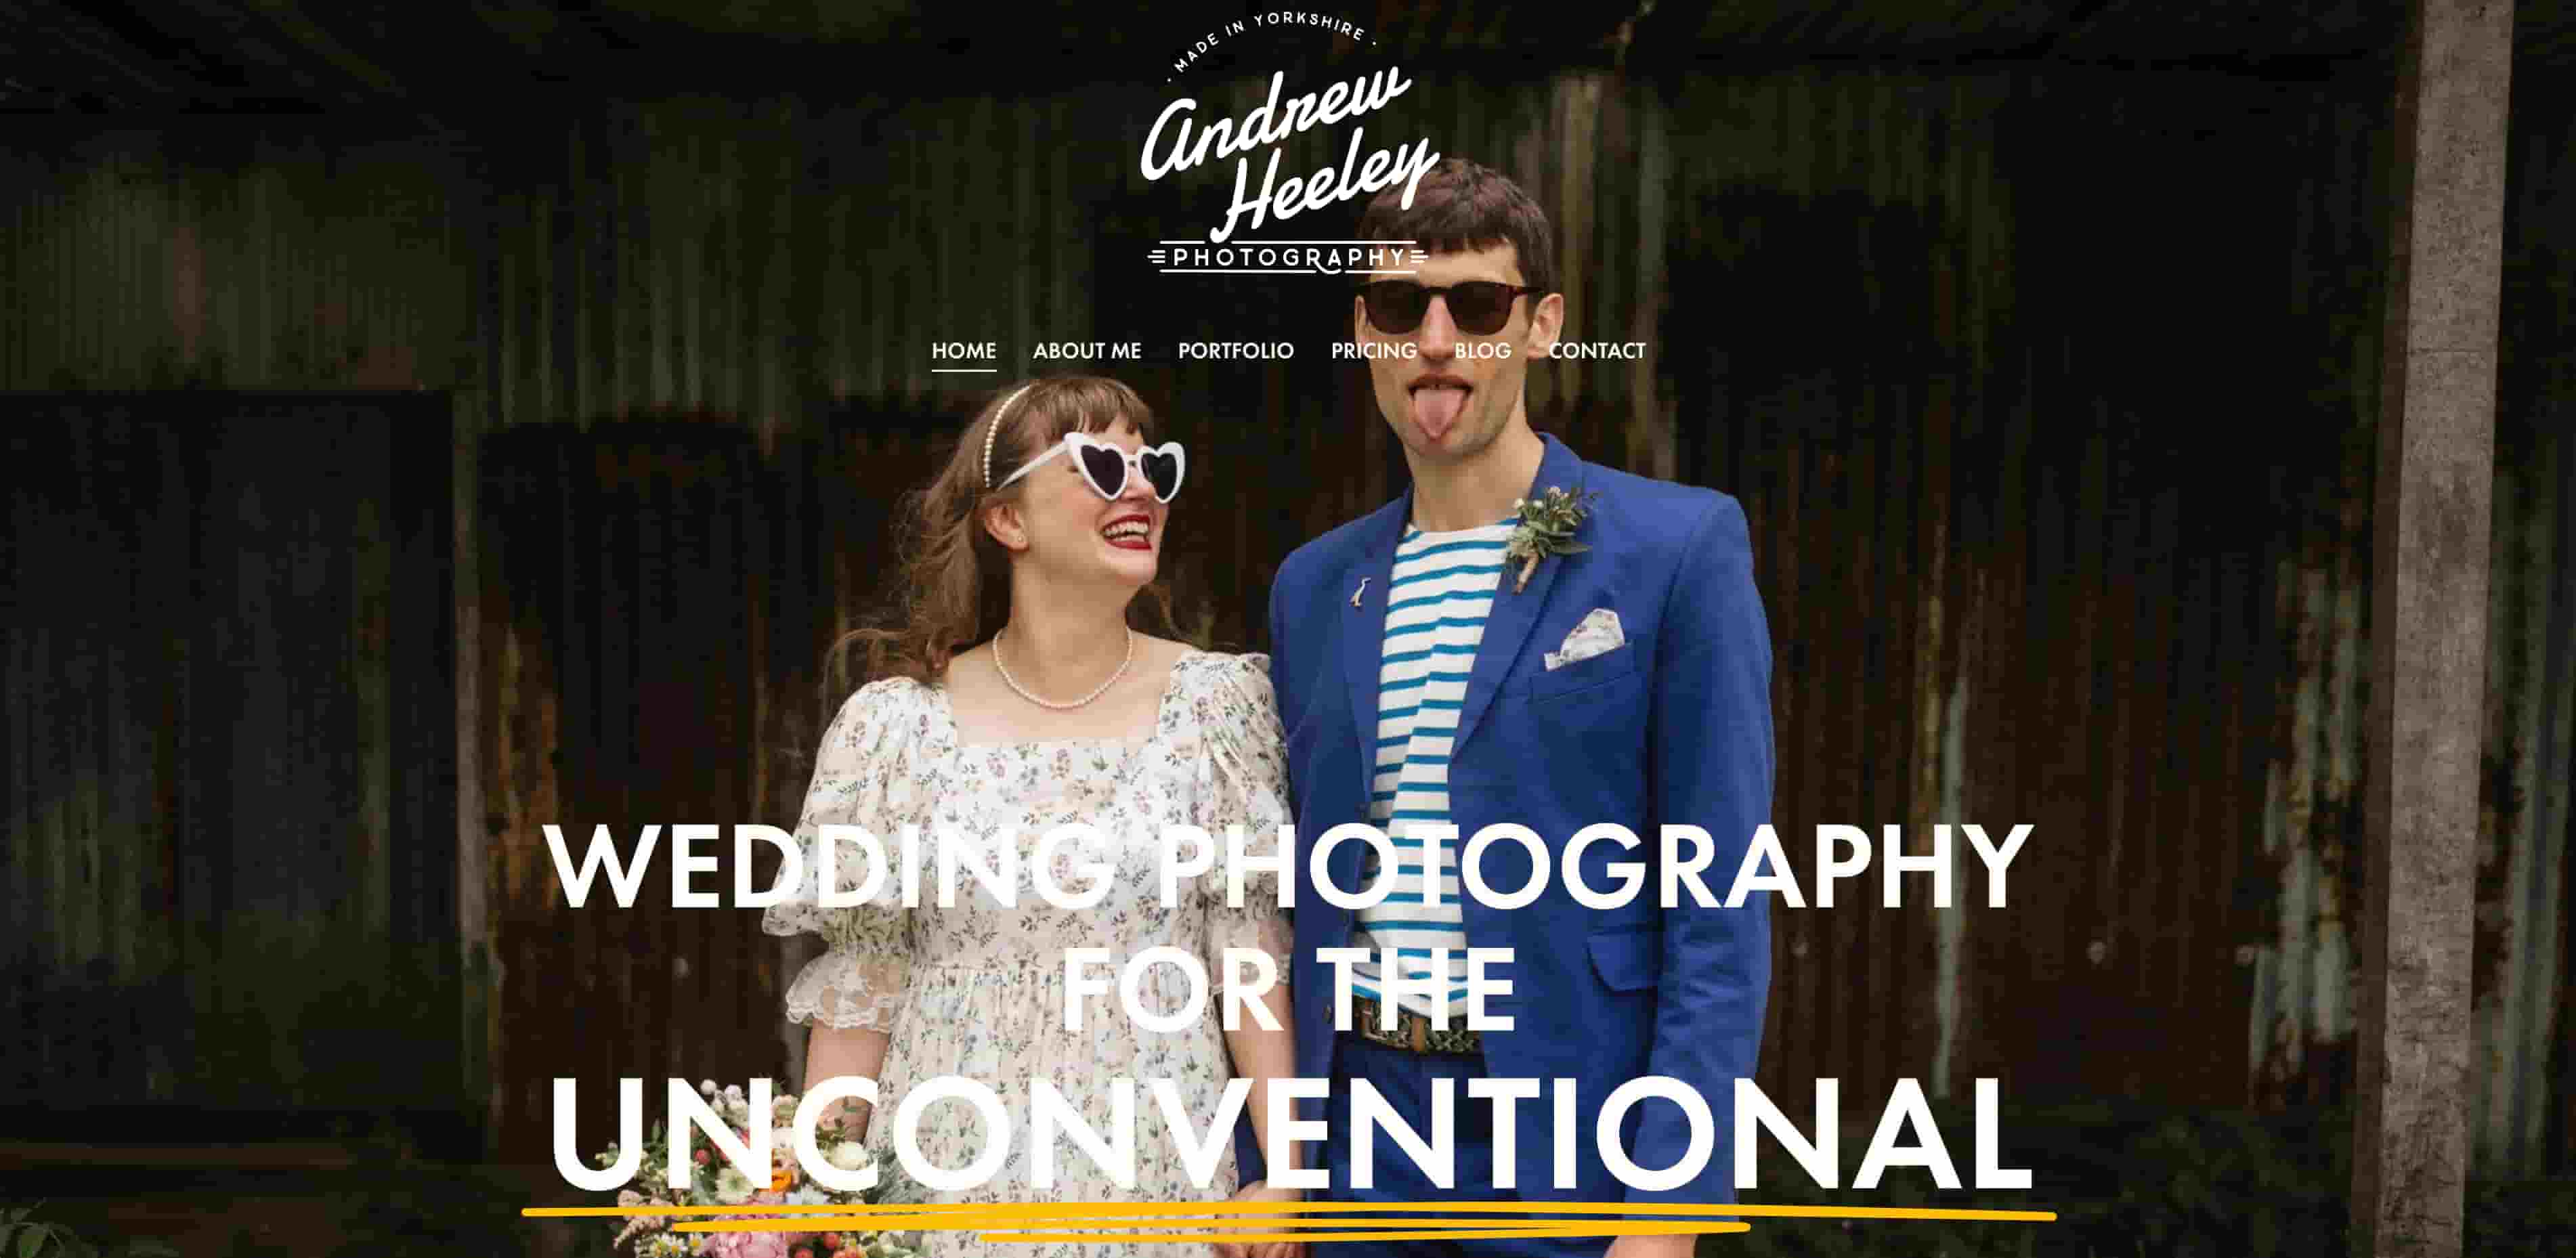 Grading 4 Beautiful Photography Websites for Design Inspiration